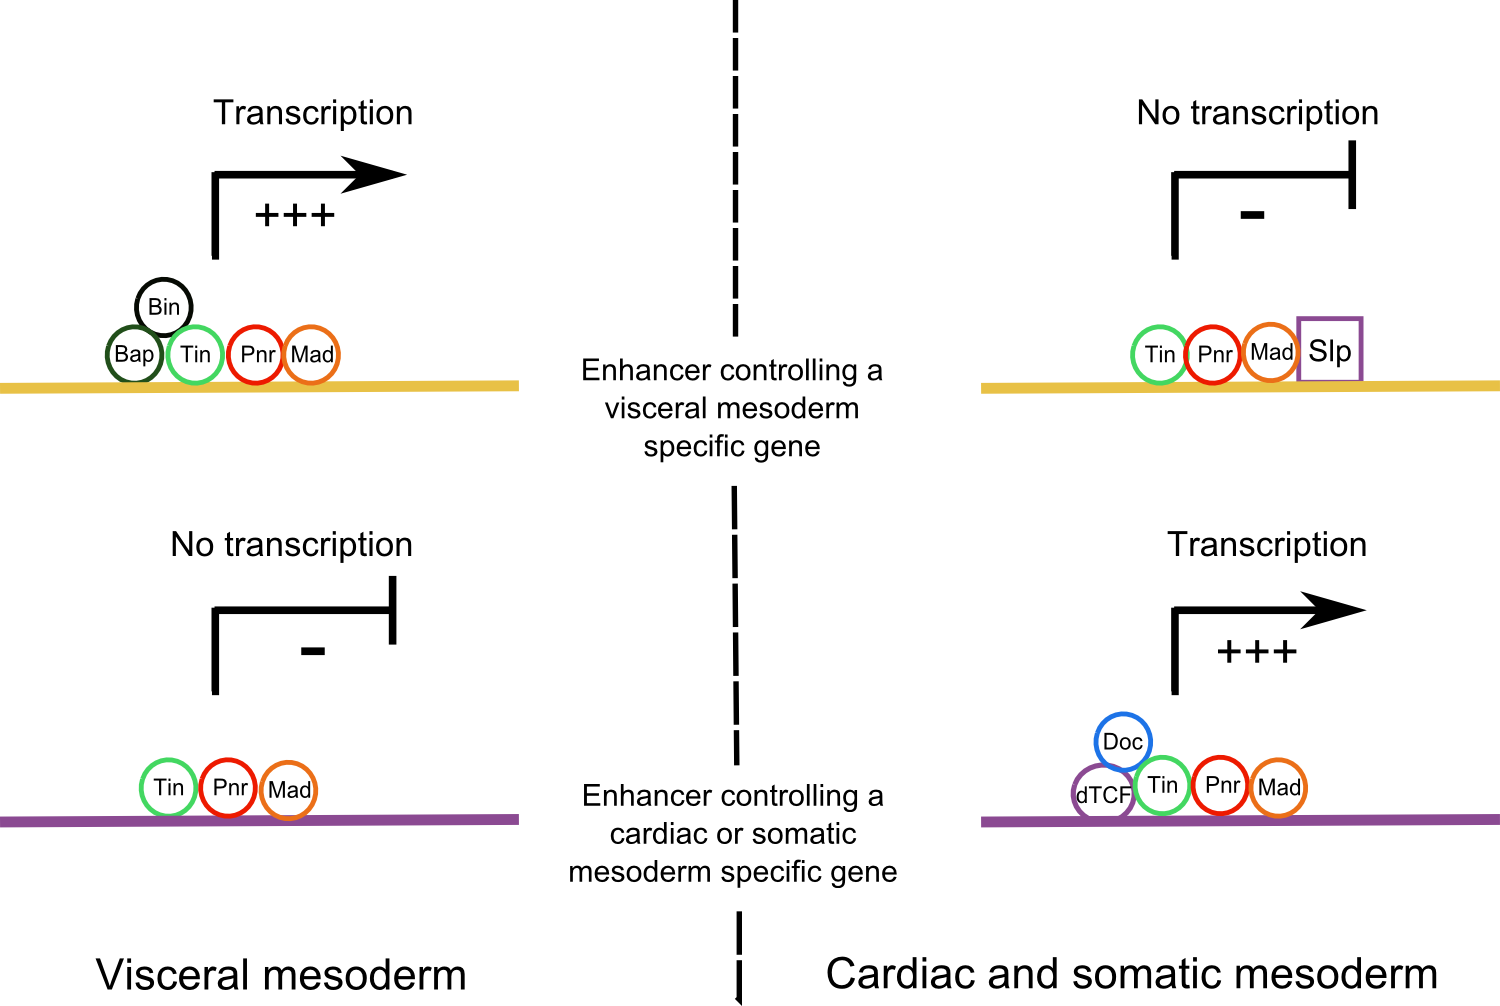 Activation of different downstream enhancers in Wg+ and Wg- domains.